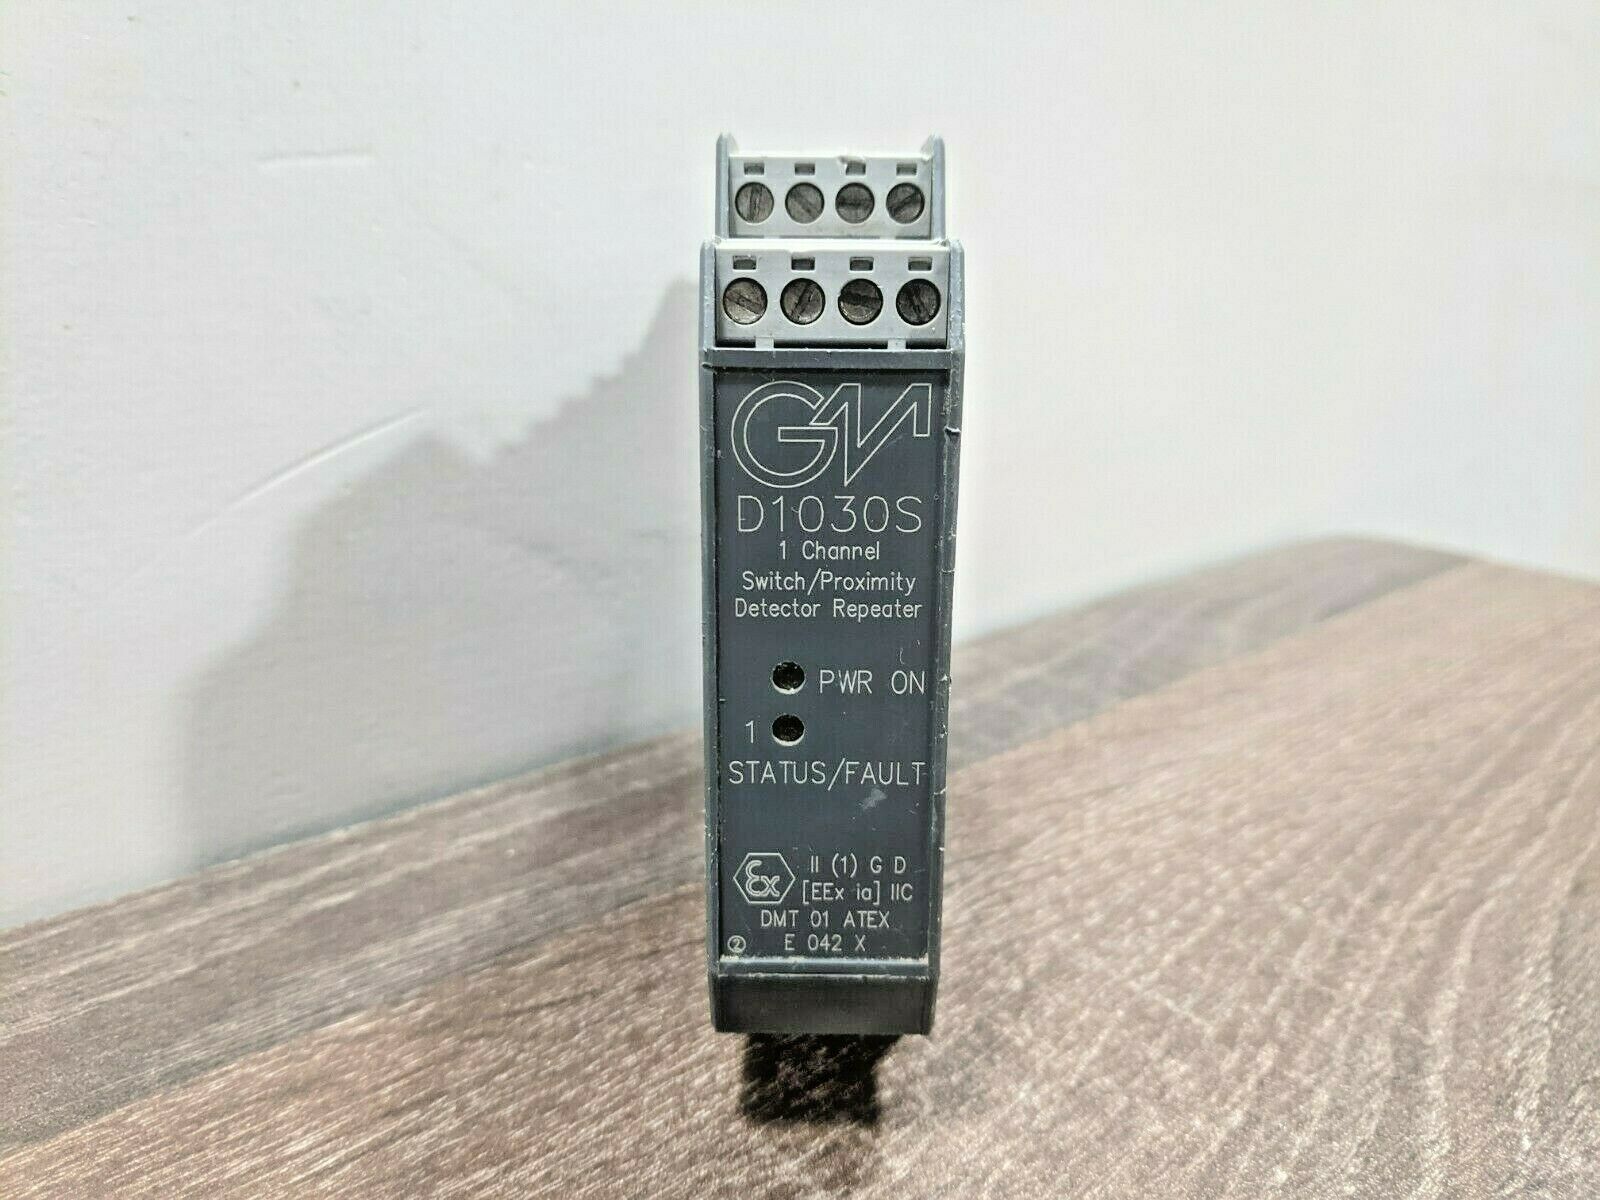 GM INTERNATIONAL D1030S 1 CHANNEL SWITCH/PROXIMITY DETECTOR REPEATER 